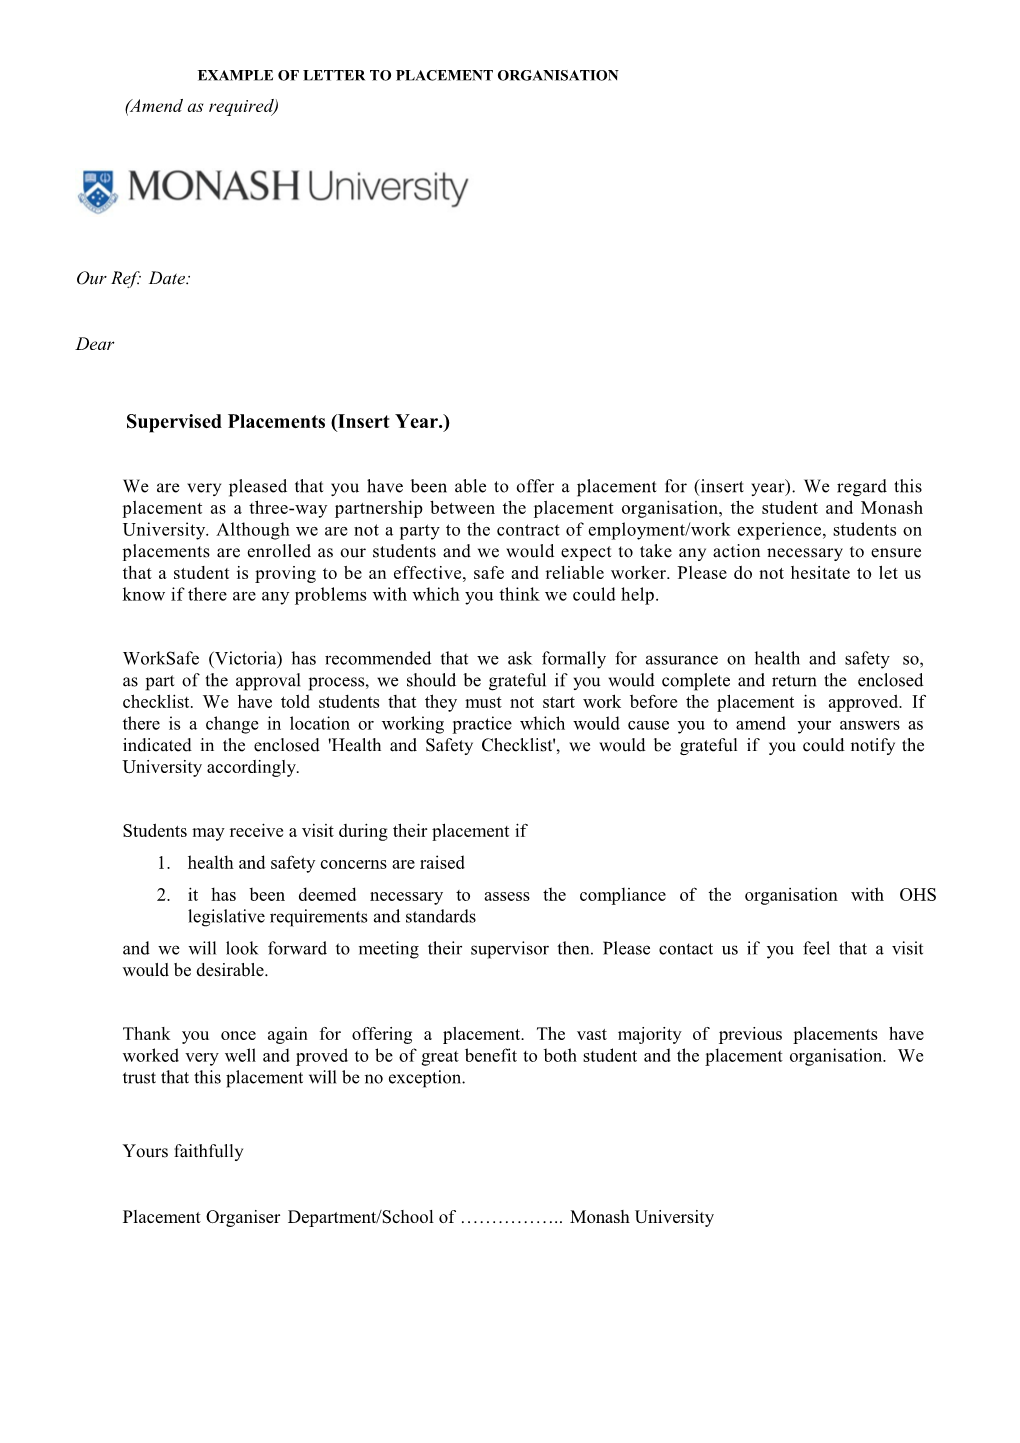 Example of Letter to Placement Organisation